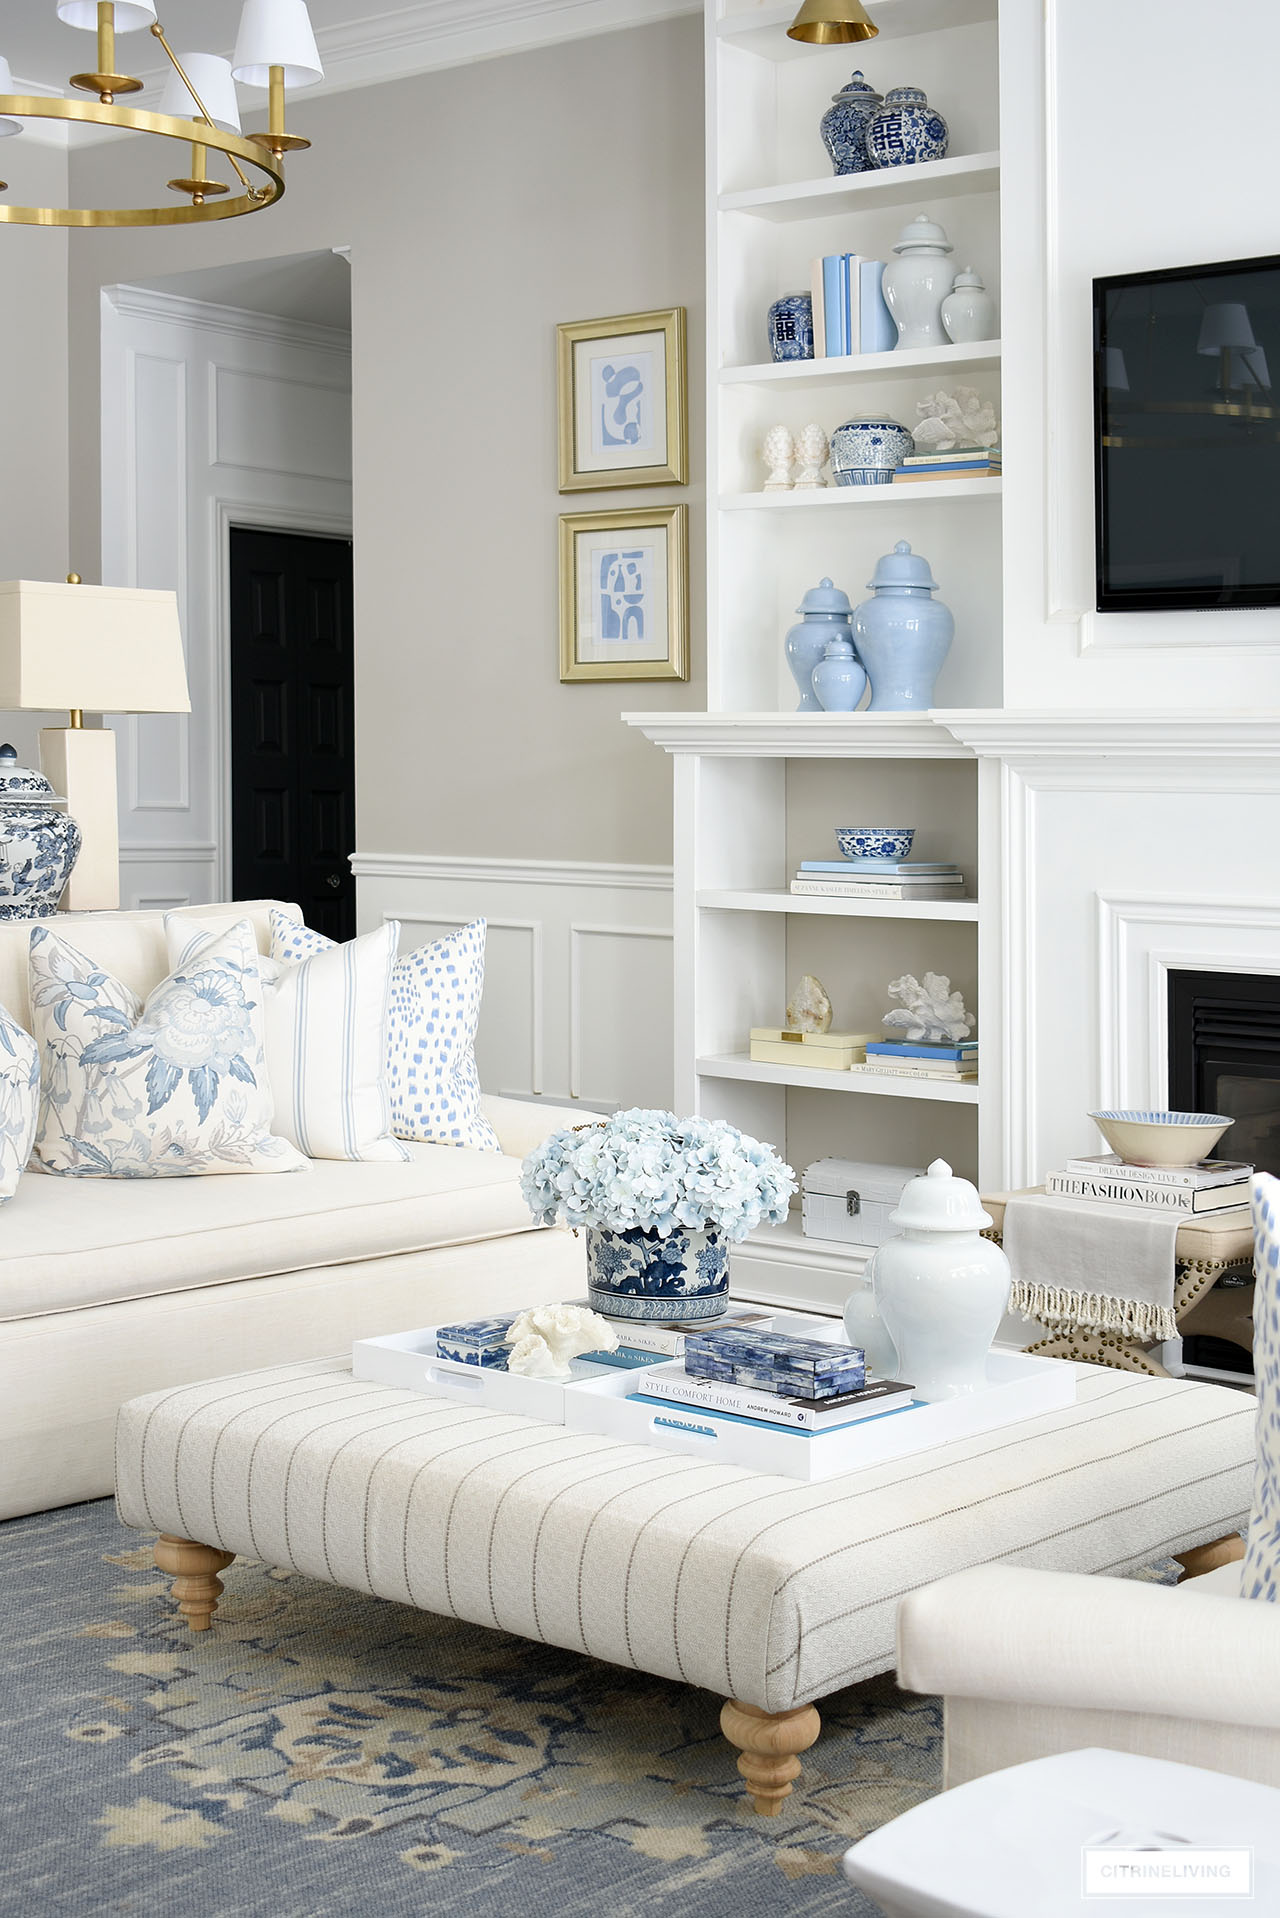 Living room styled for spring with blue and white accessories and pillows.